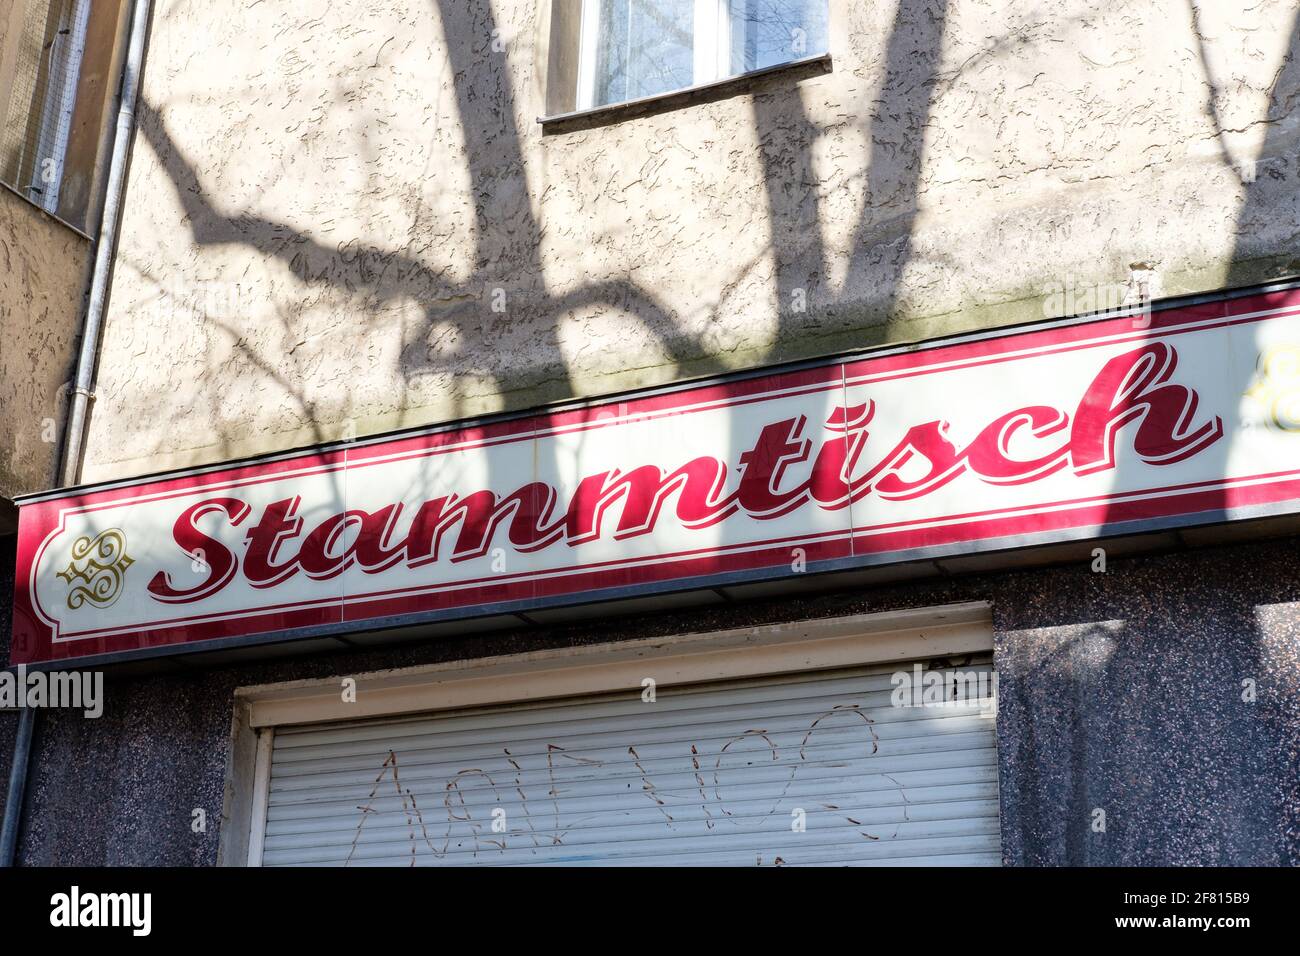 Stammtisch (regulars' table) sign at a tradtional German neighborhood pub in Berlin, Germany lies closed during lockdown in April 2020. Stock Photo